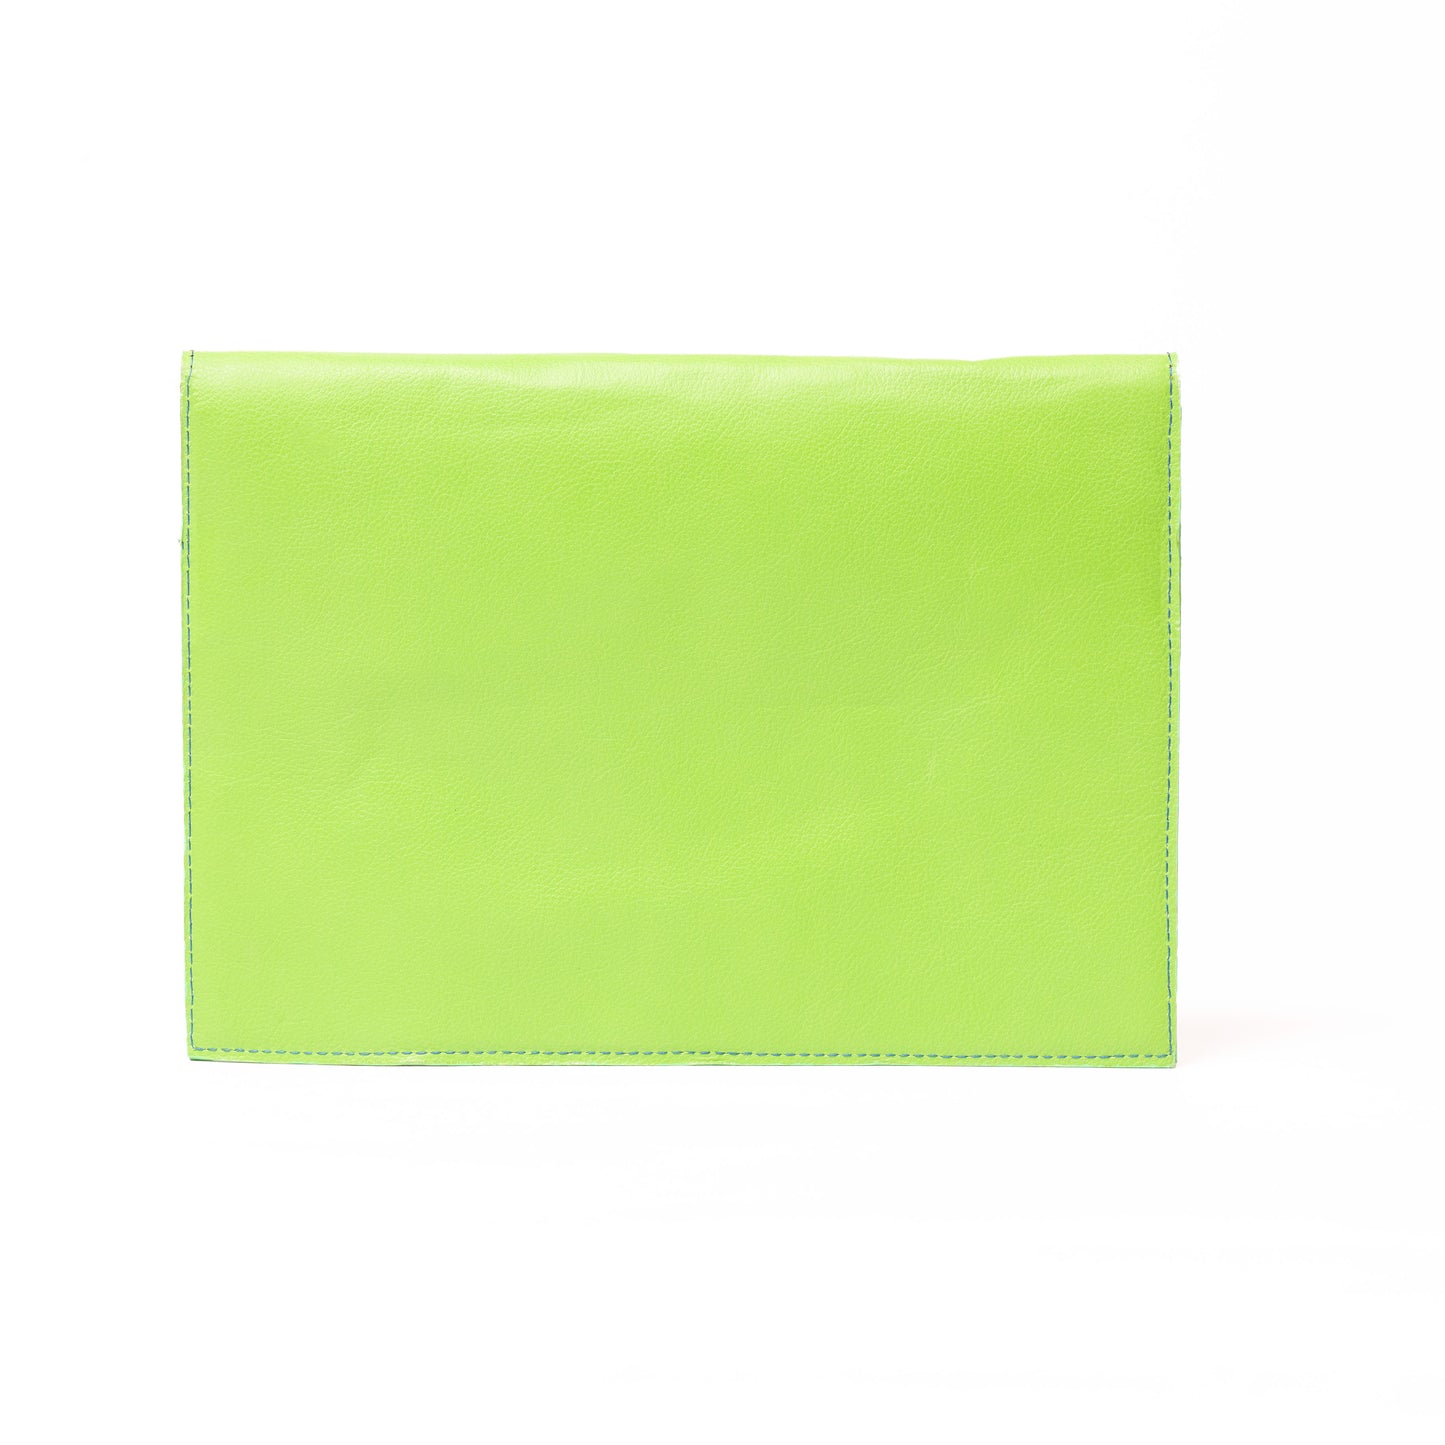 Renee Green & Blue Leather Foldover Clutch